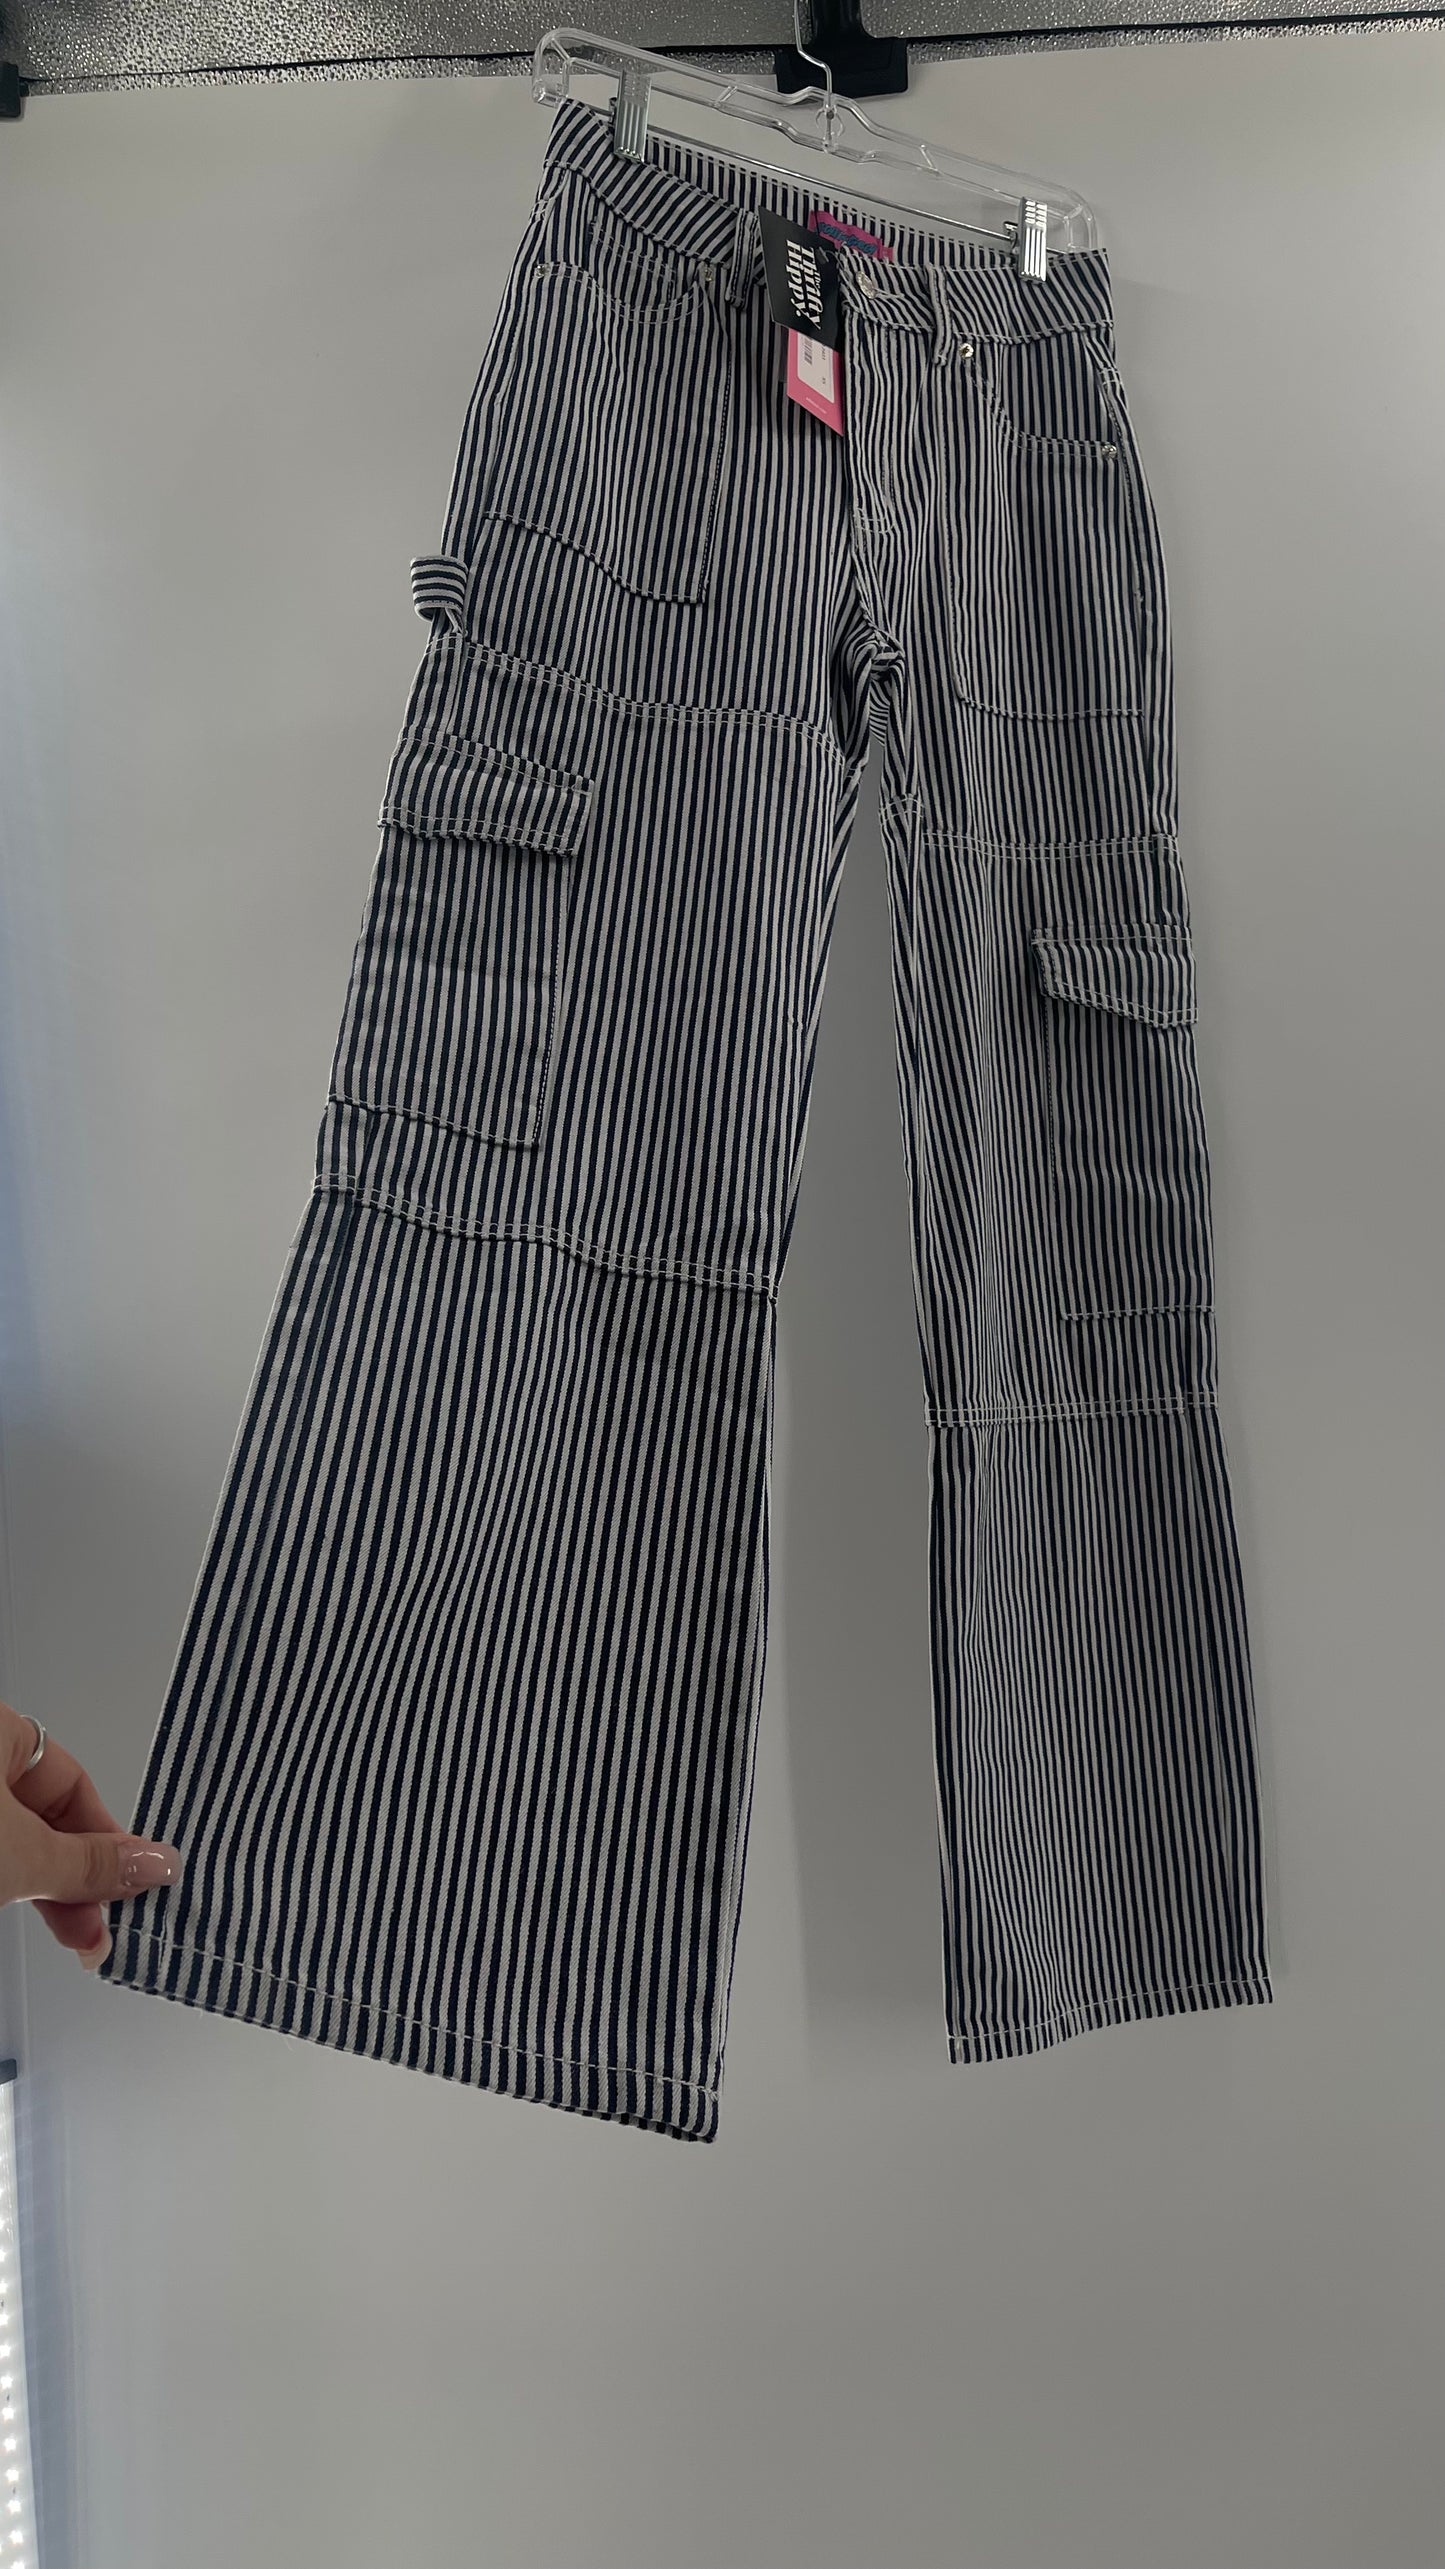 Edikted Stripe Out Cargos with Tags Attached (XS)